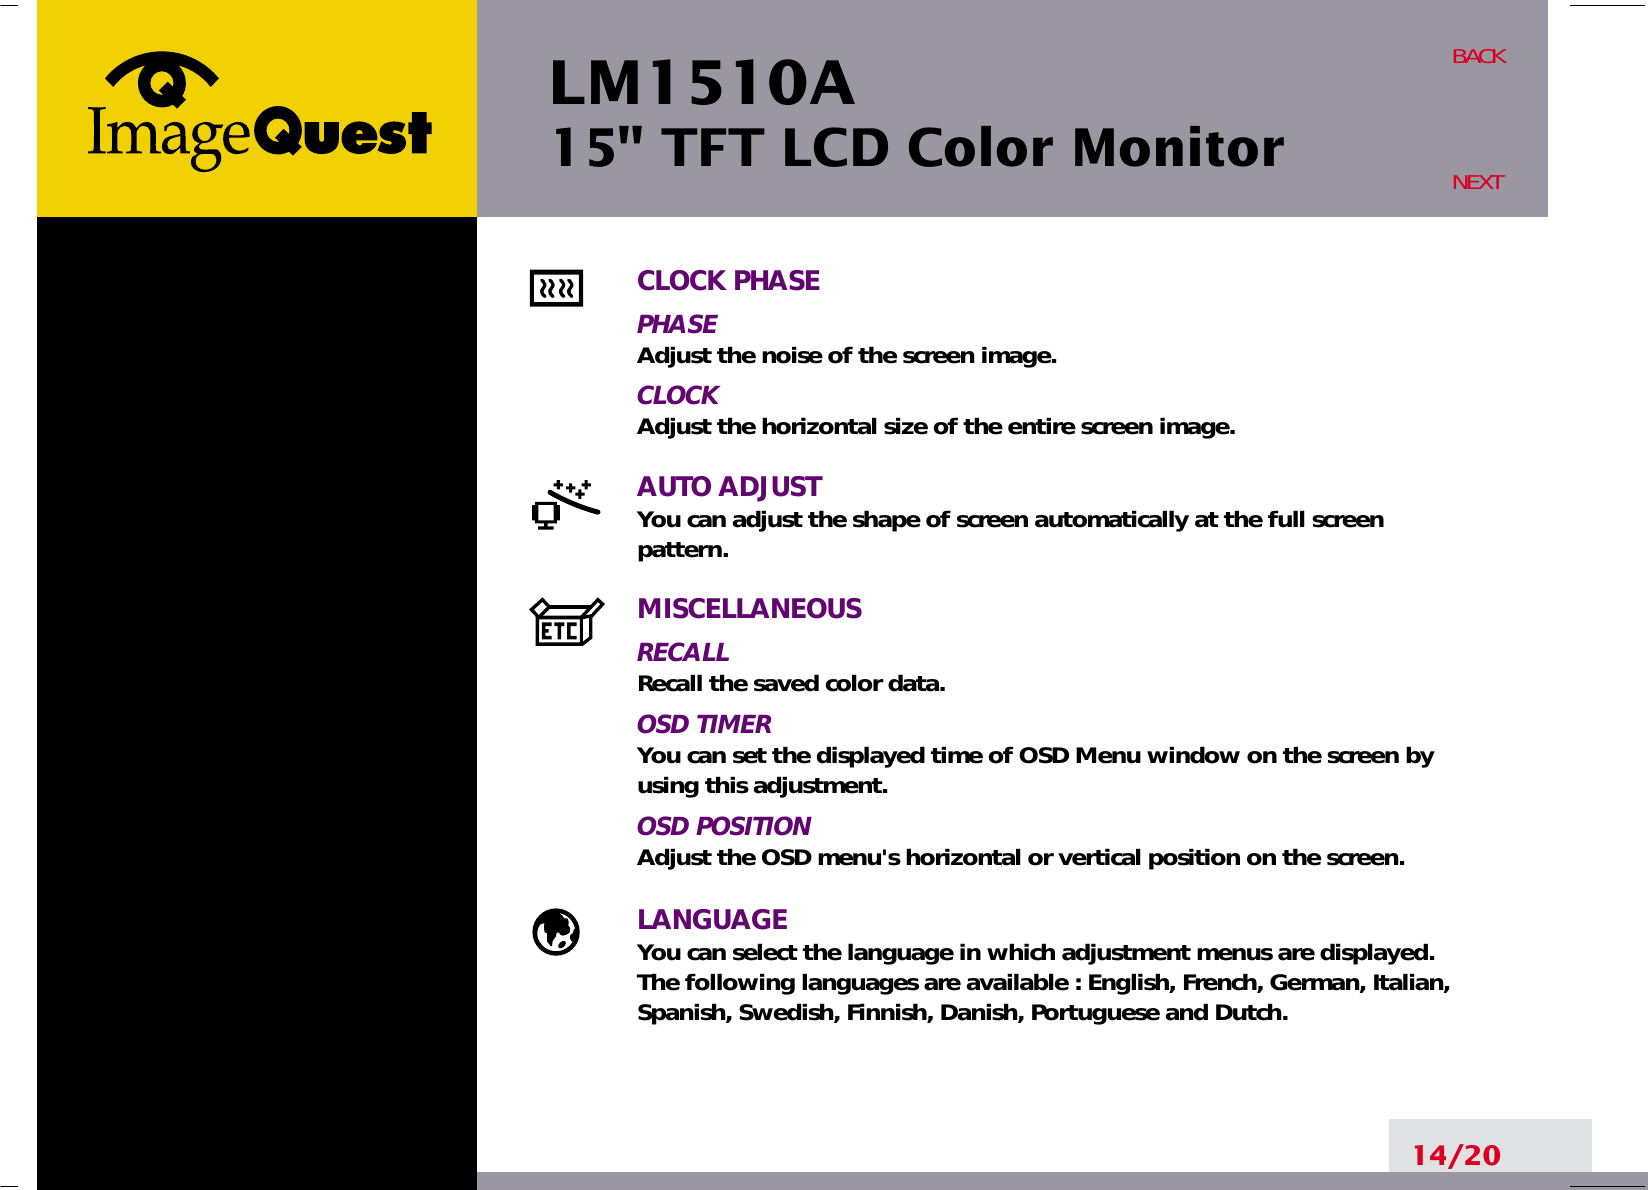 LM1510A15&quot; TFT LCD Color Monitor14/20BACKNEXTCLOCK PHASEPHASEAdjust the noise of the screen image.CLOCKAdjust the horizontal size of the entire screen image.AUTO ADJUSTYou can adjust the shape of screen automatically at the full screenpattern.MISCELLANEOUSRECALLRecall the saved color data.OSD TIMERYou can set the displayed time of OSD Menu window on the screen byusing this adjustment.OSD POSITIONAdjust the OSD menu&apos;s horizontal or vertical position on the screen.LANGUAGEYou can select the language in which adjustment menus are displayed. The following languages are available : English, French, German, Italian,Spanish, Swedish, Finnish, Danish, Portuguese and Dutch.